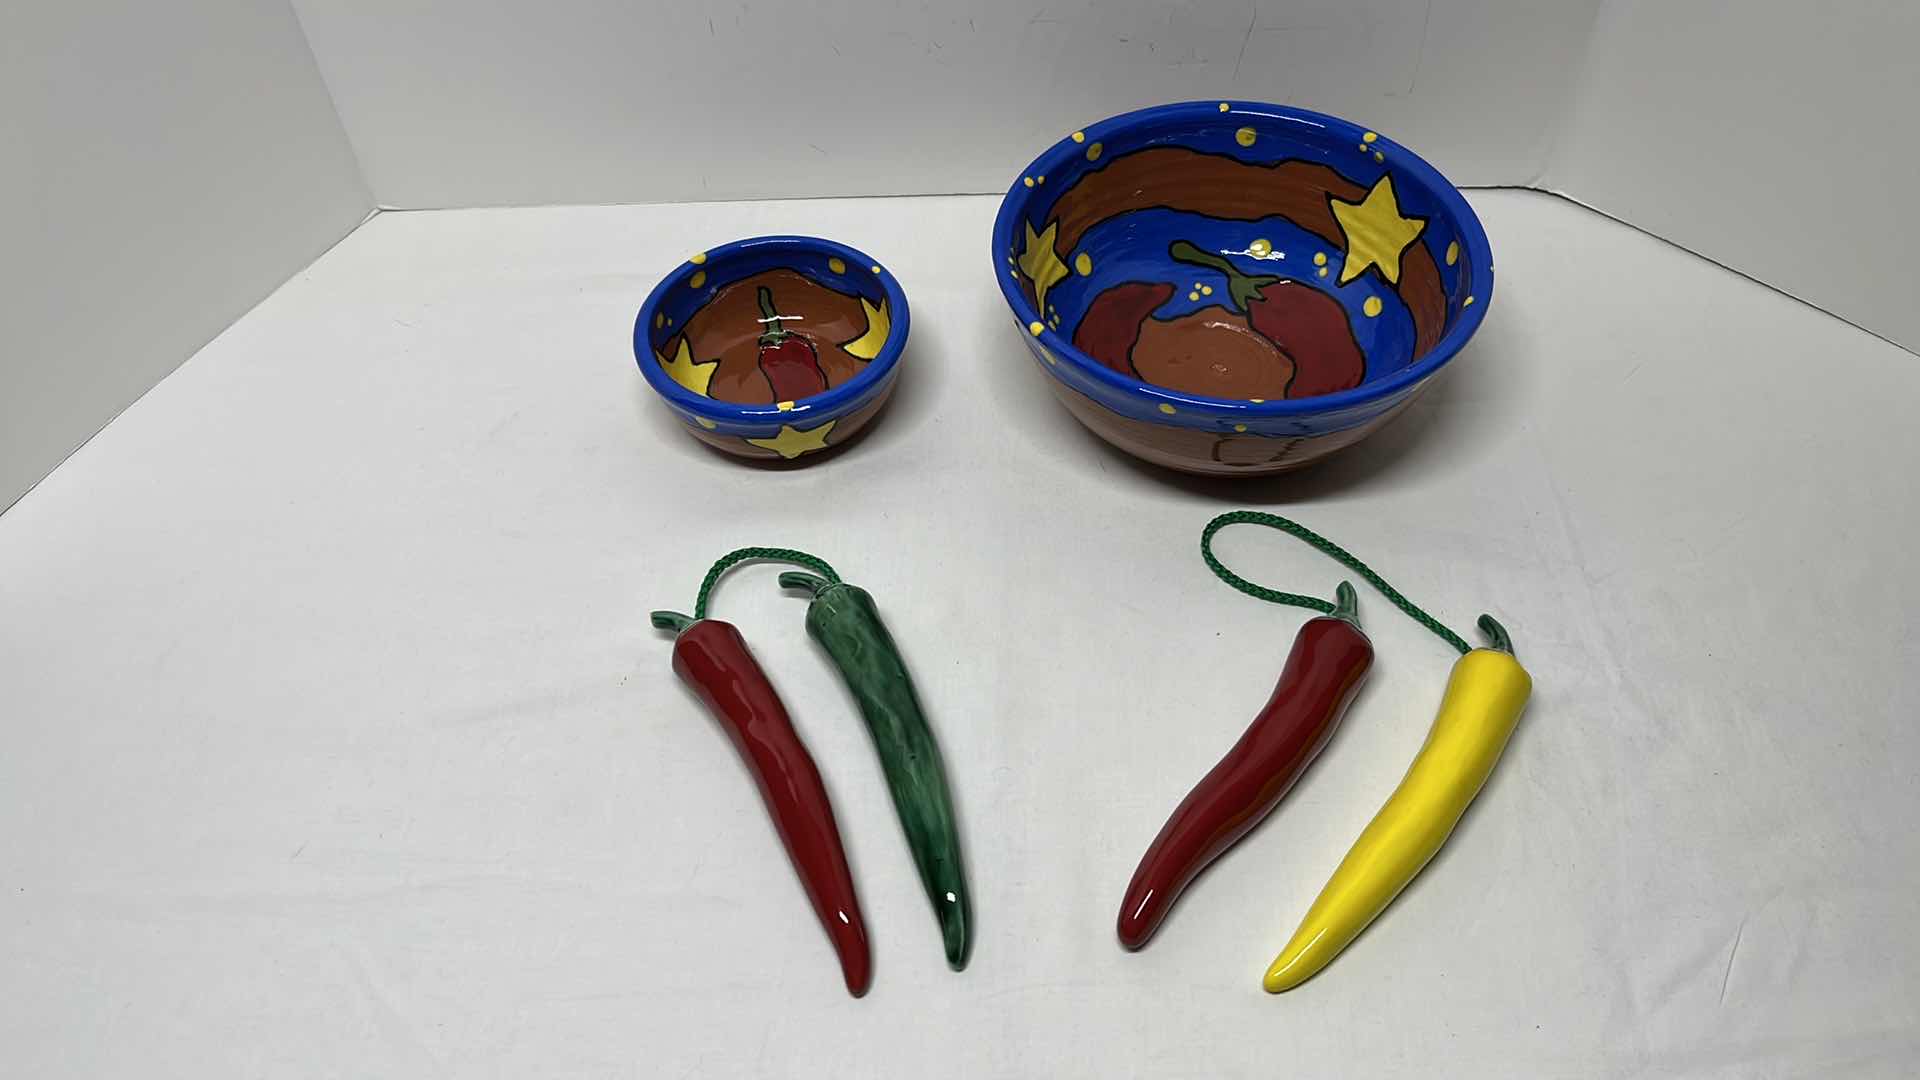 Photo 1 of HAND-PAINTED CERAMIC CHILE PEPPER MIXING BOWLS W CERAMIC HANGING CHILE PEPPERS